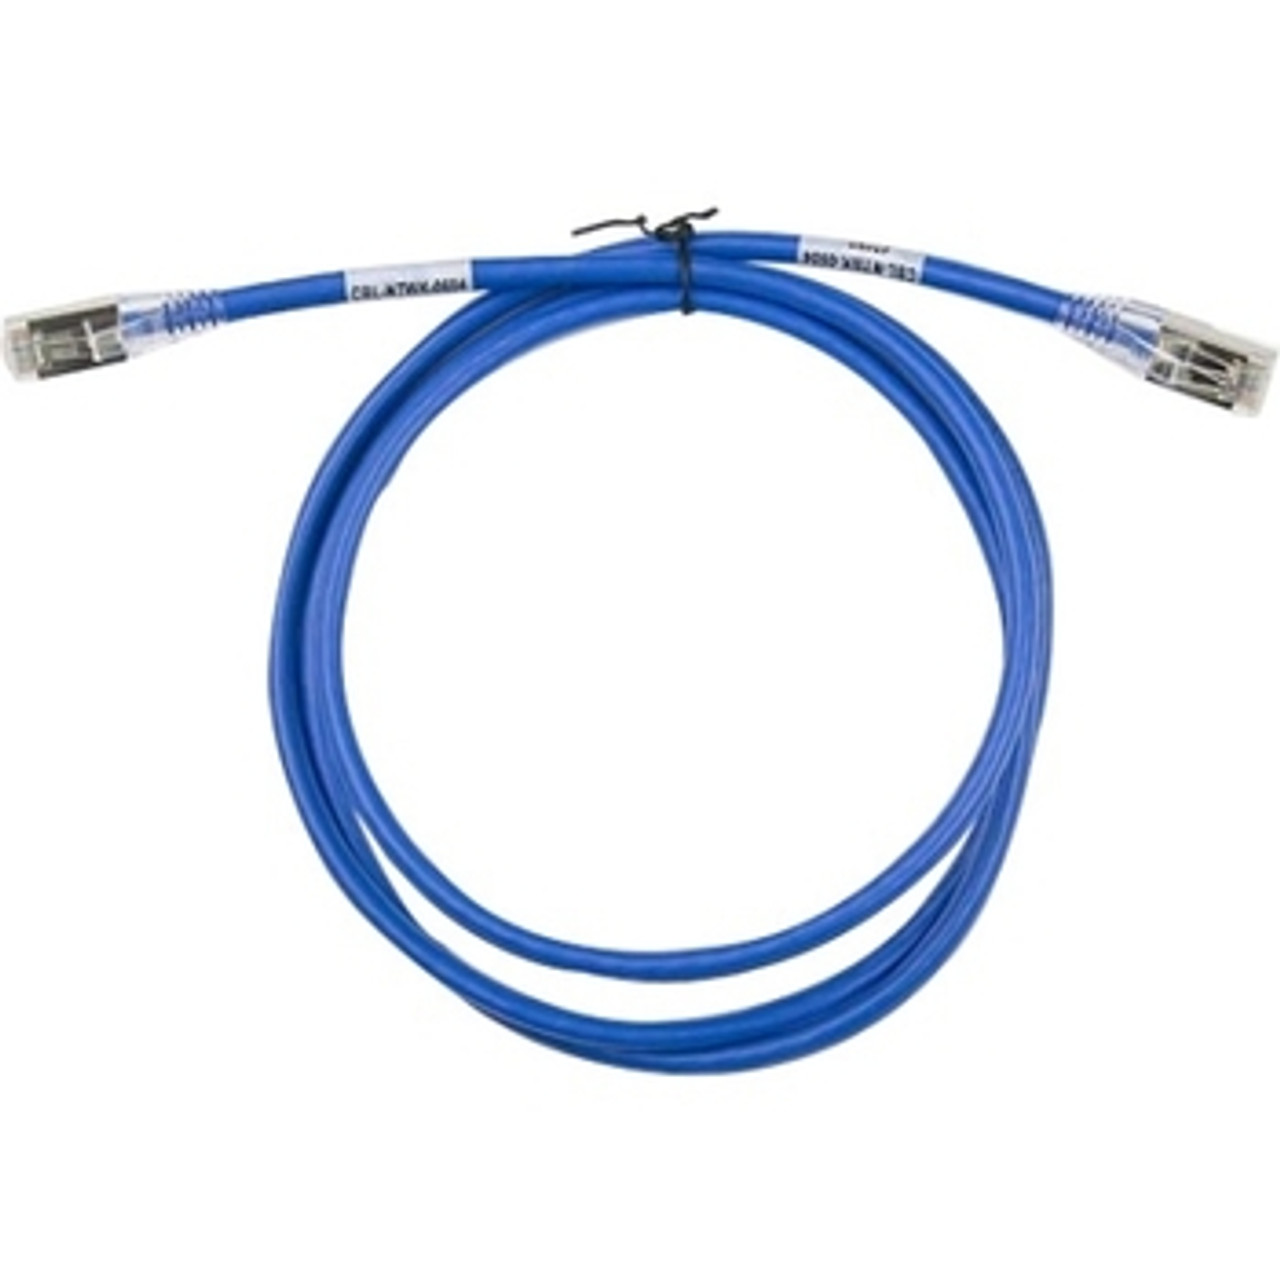 CBL-NTWK-0604 Supermicro RJ45 Cat6a 550MHz Rated Blue 5 FT Patch Cable 24AWG